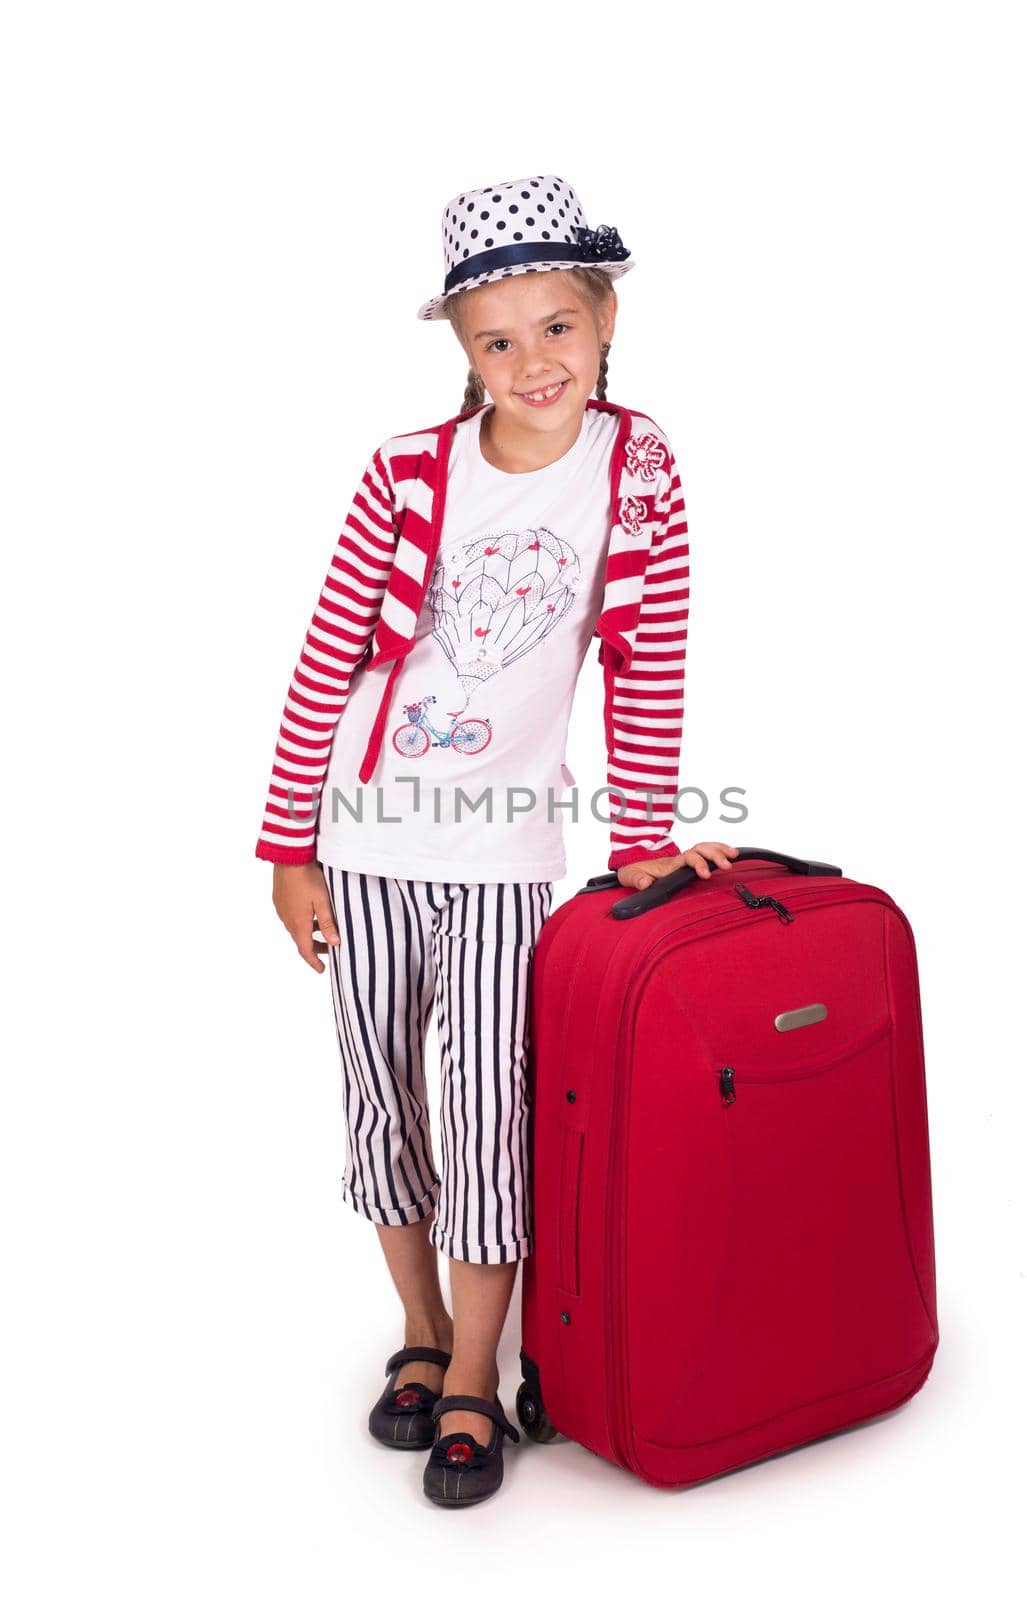 little girl with a suitcase and a Pisa tower made of cardboard